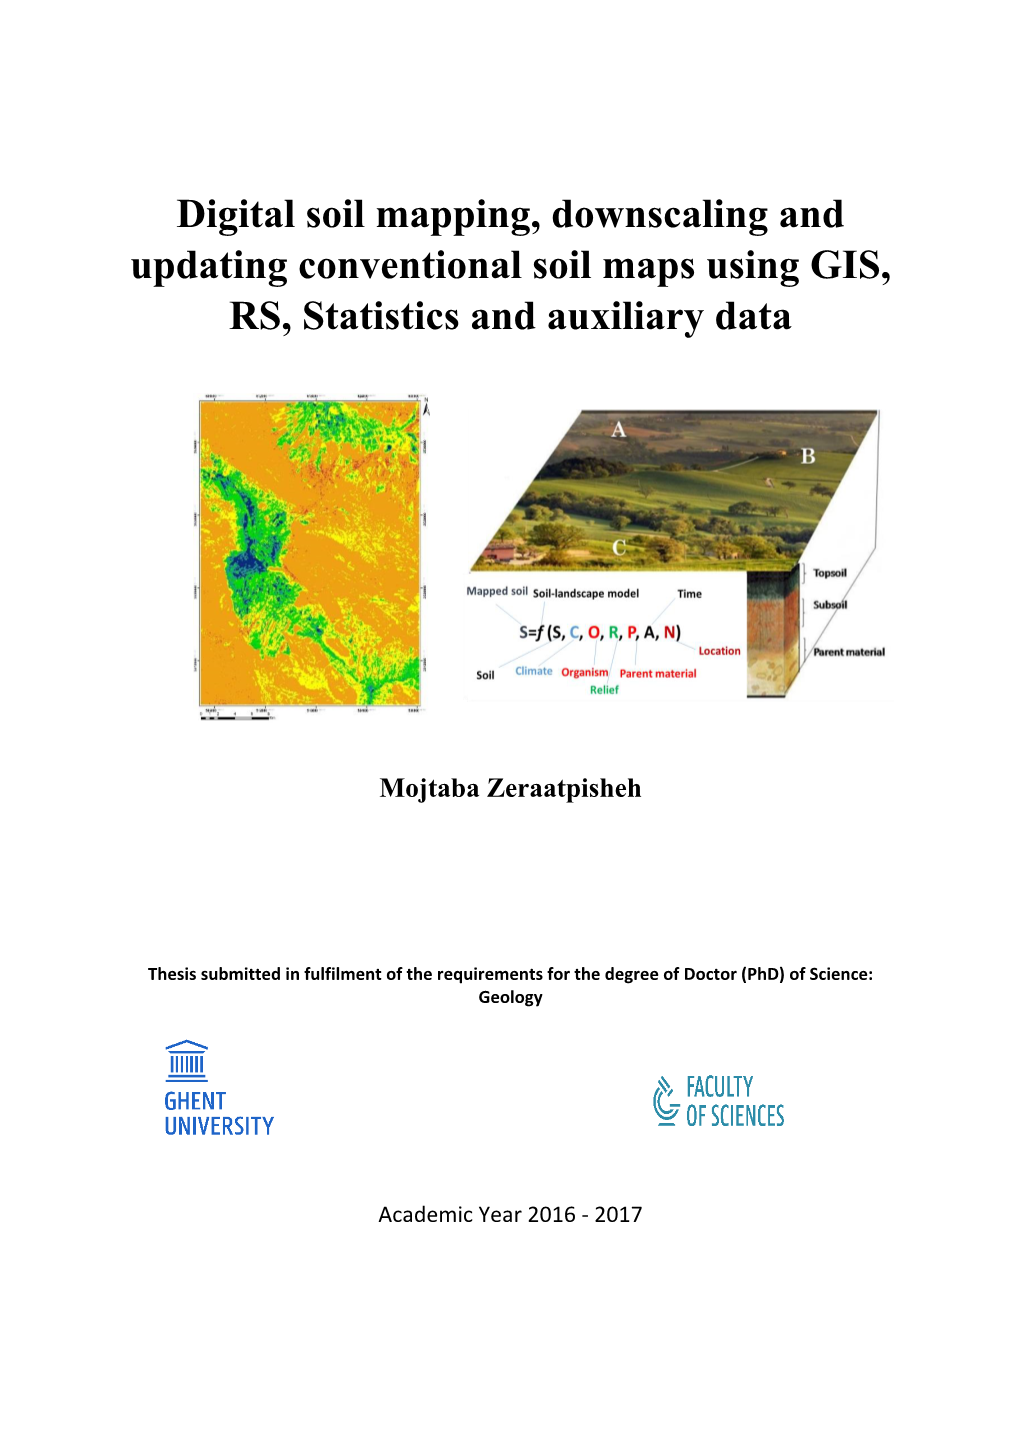 Digital Soil Mapping, Downscaling and Updating Conventional Soil Maps Using GIS, RS, Statistics and Auxiliary Data